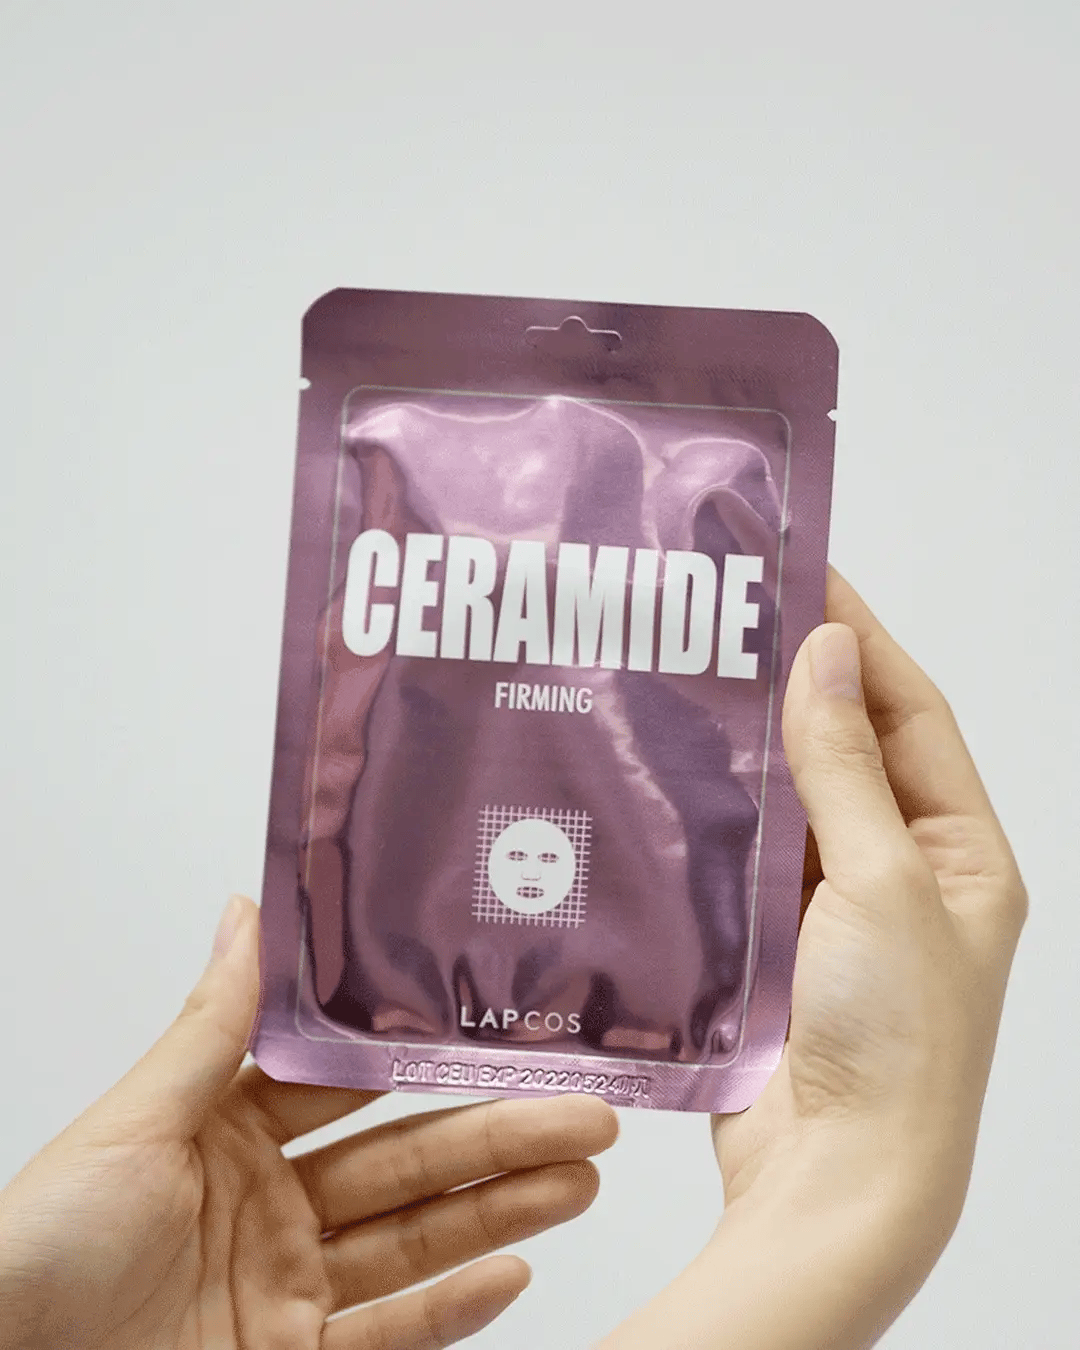 a video showing the juicy sheet mask from lapcos of the daily ceramide mask